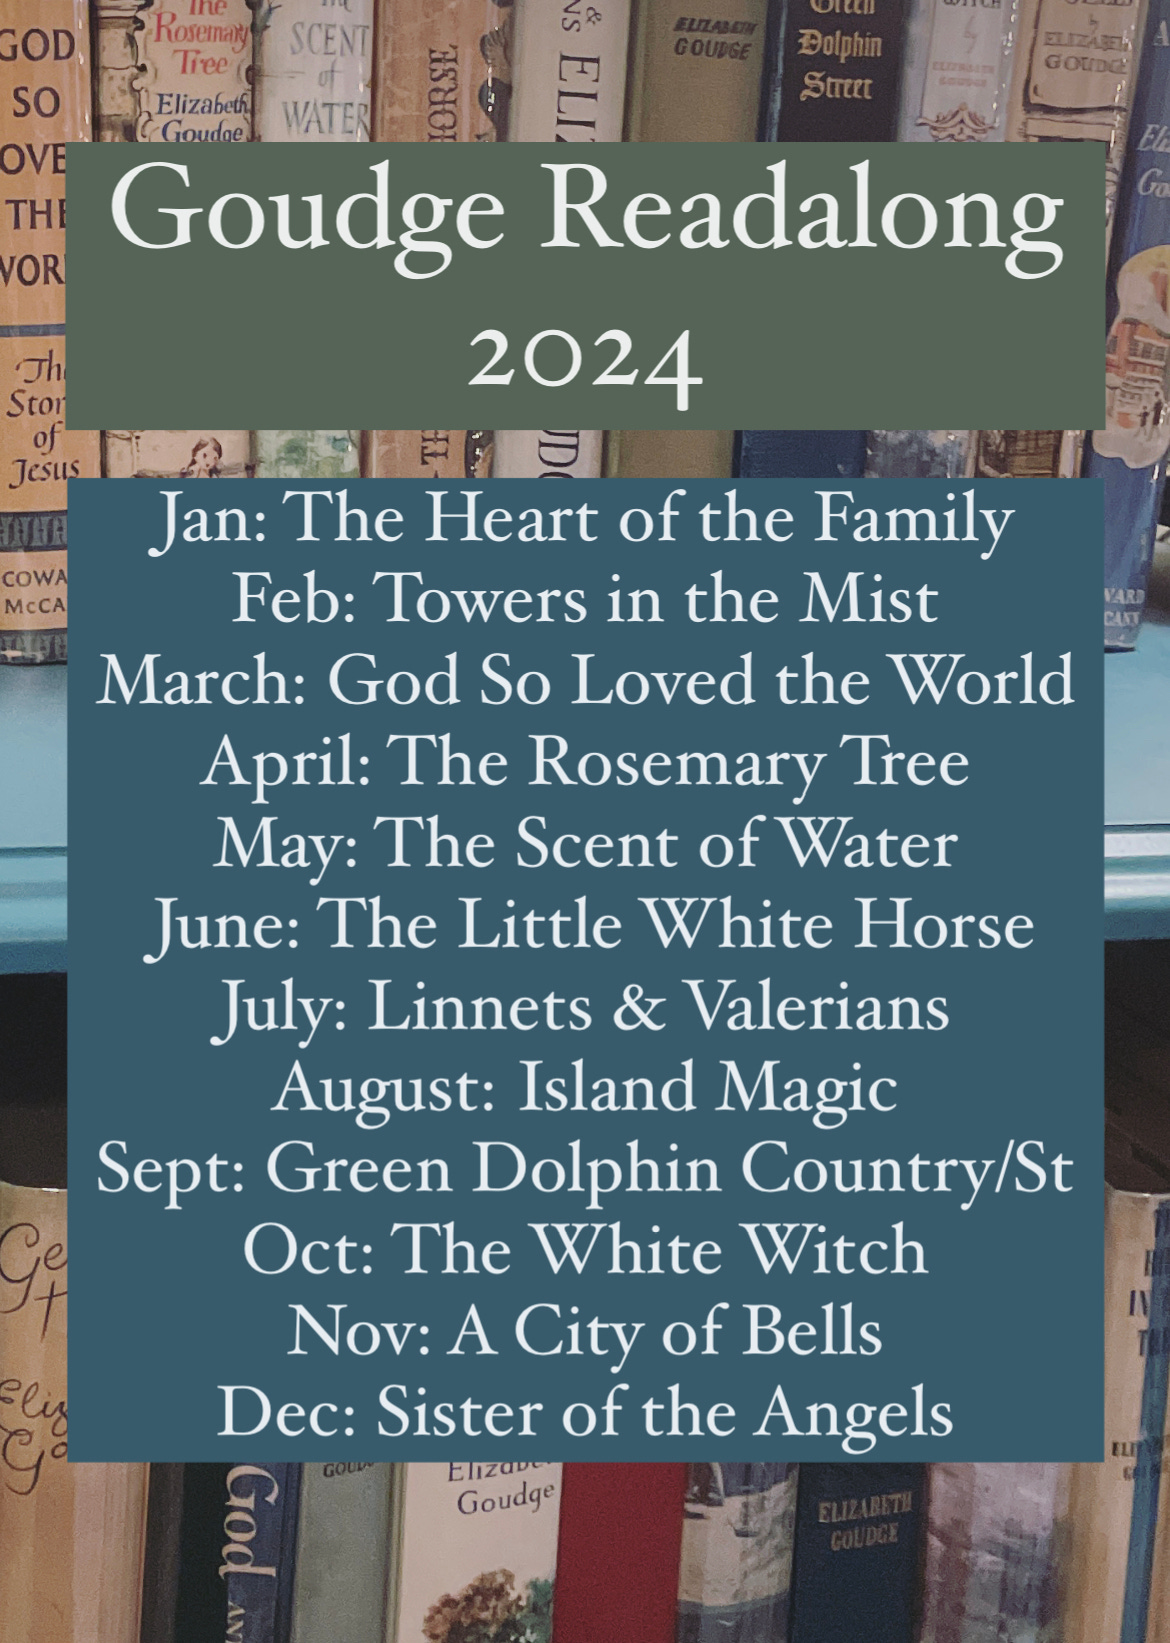 Goudge Readalong 2024 Th Sto of Jesus Jan: The Heart of the Family COWA McCA Feb: Towers in the Mist * March: God So Loved the World April: The Rosemary Tree May: The Scent of Water June: The Little White Horse July: Linnets & Valerians August: Island Magic Sept: Green Dolphin Country/St Oct: The White Witch Nov: A City of Bells Eliz Dec: Sister of the Angels